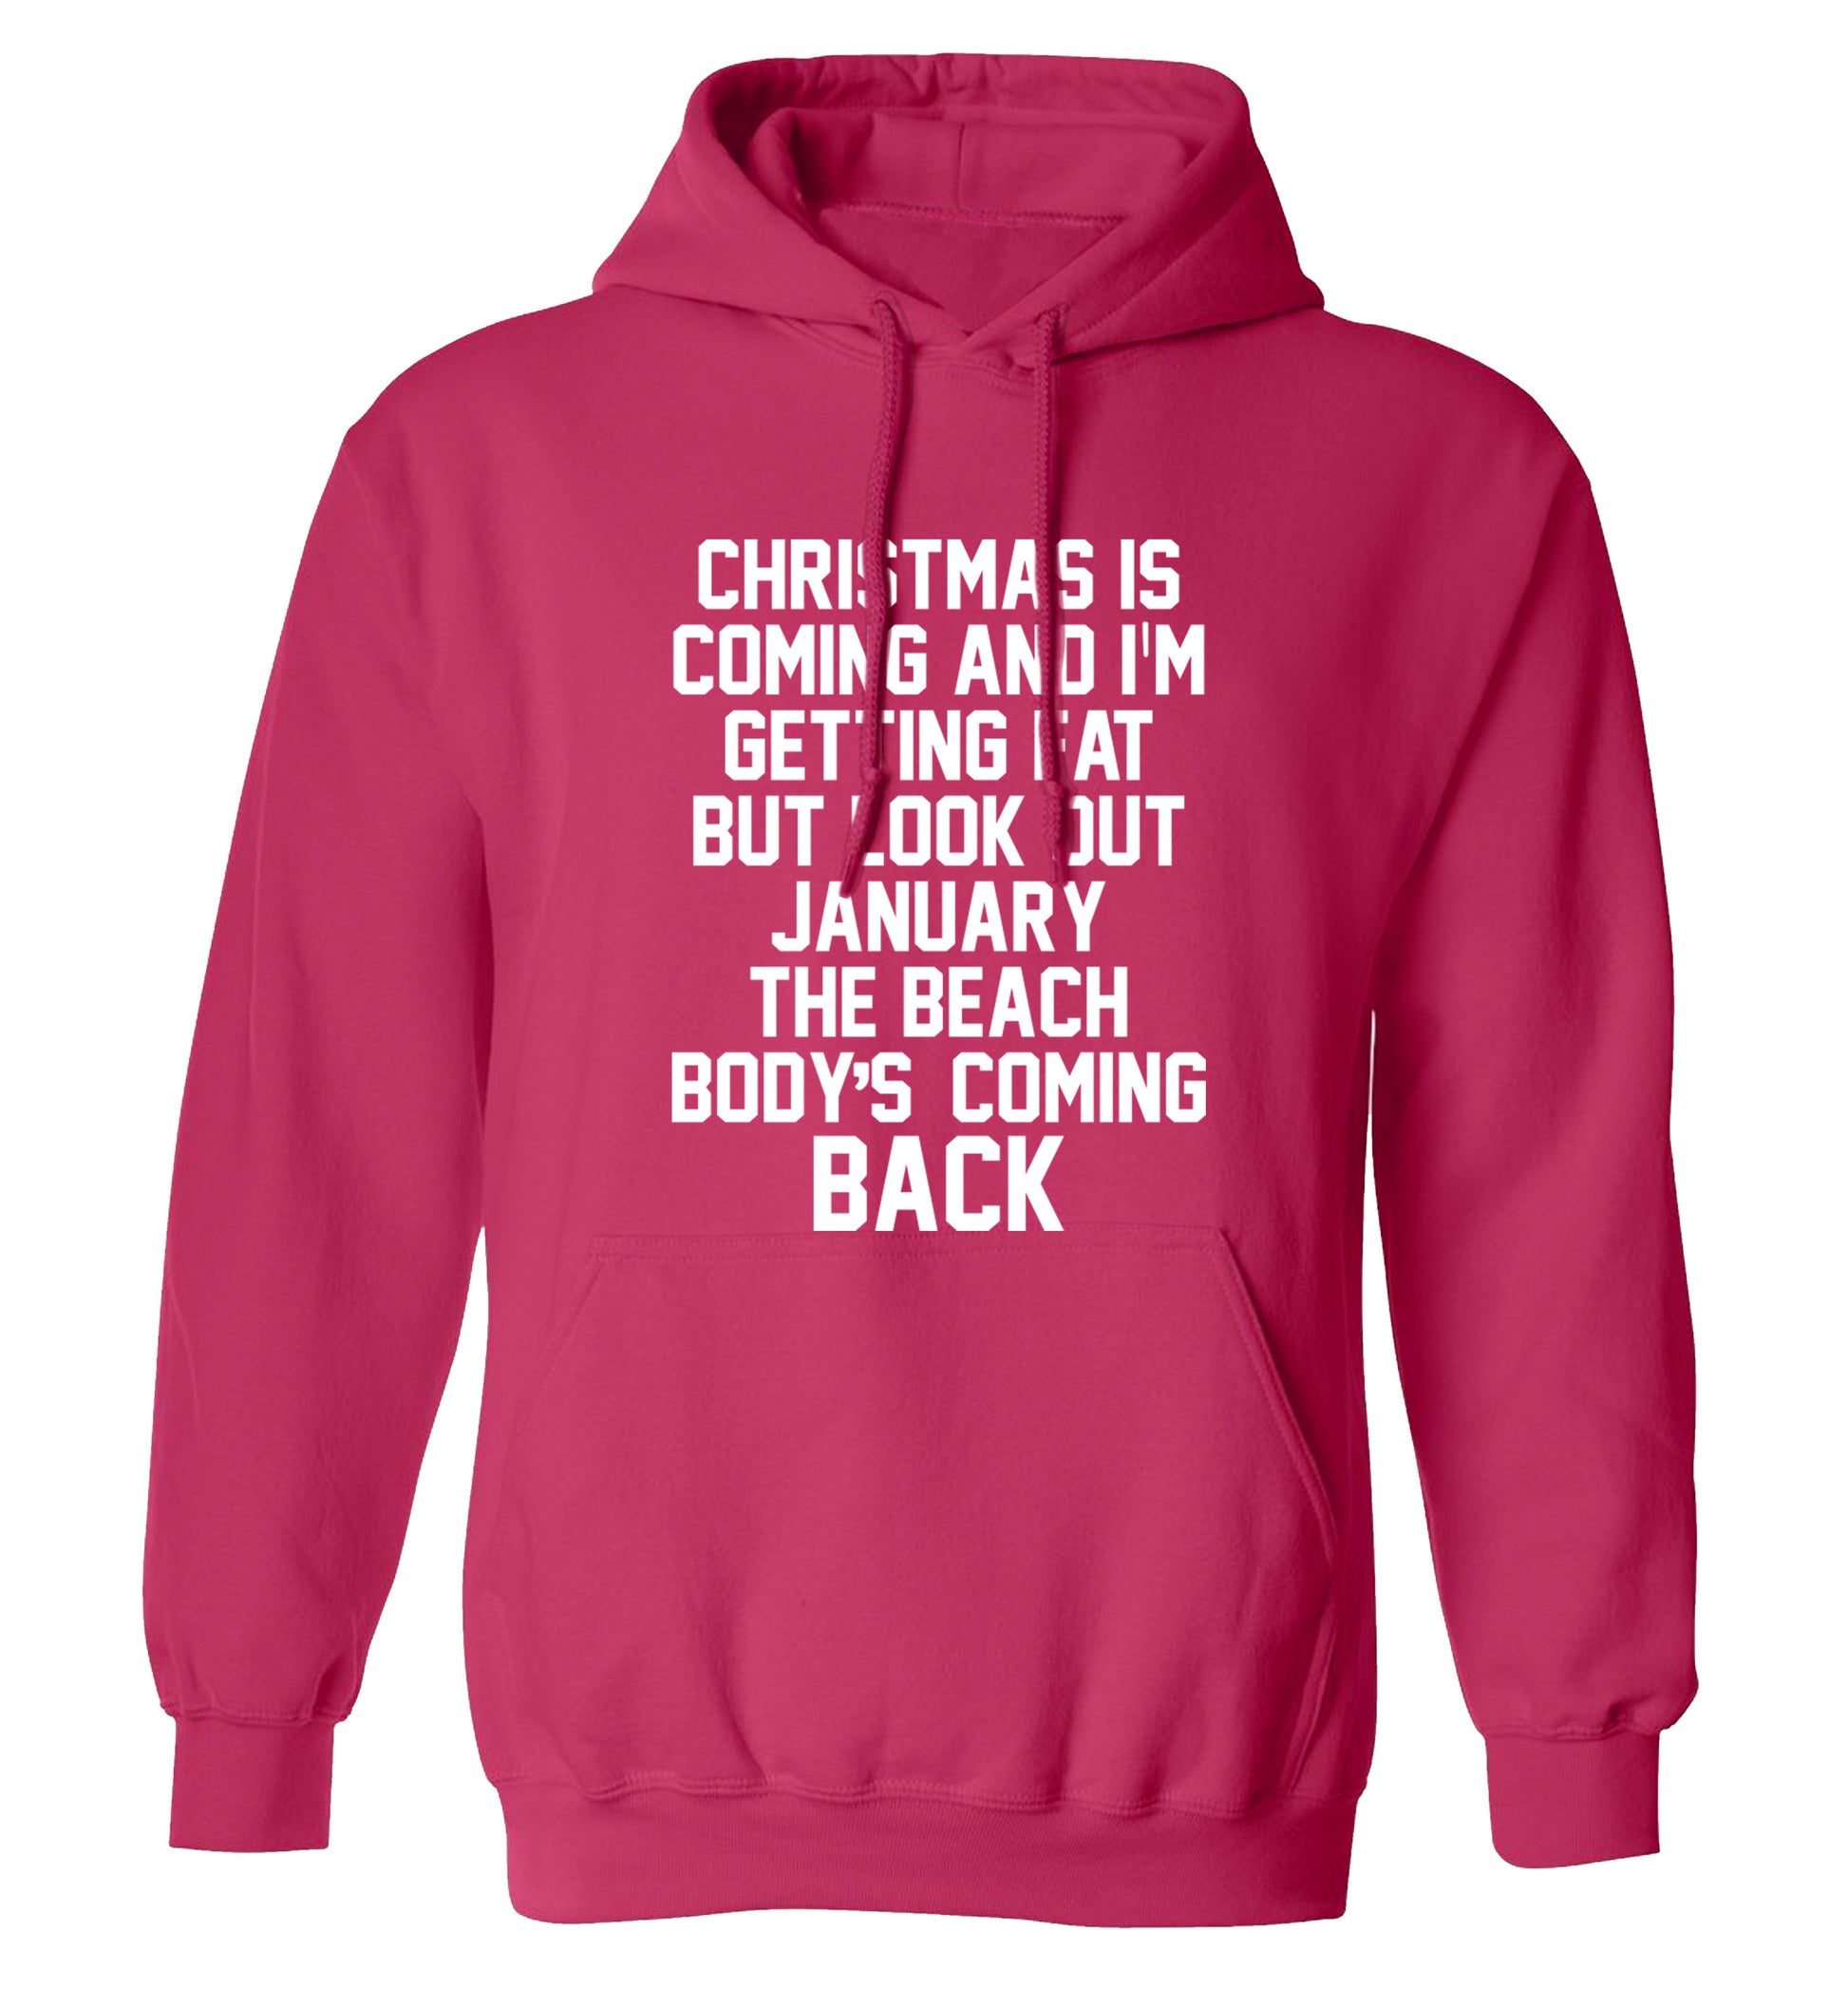 Christmas is coming and I'm getting fat but look out January the beach body's coming back! adults unisex pink hoodie 2XL